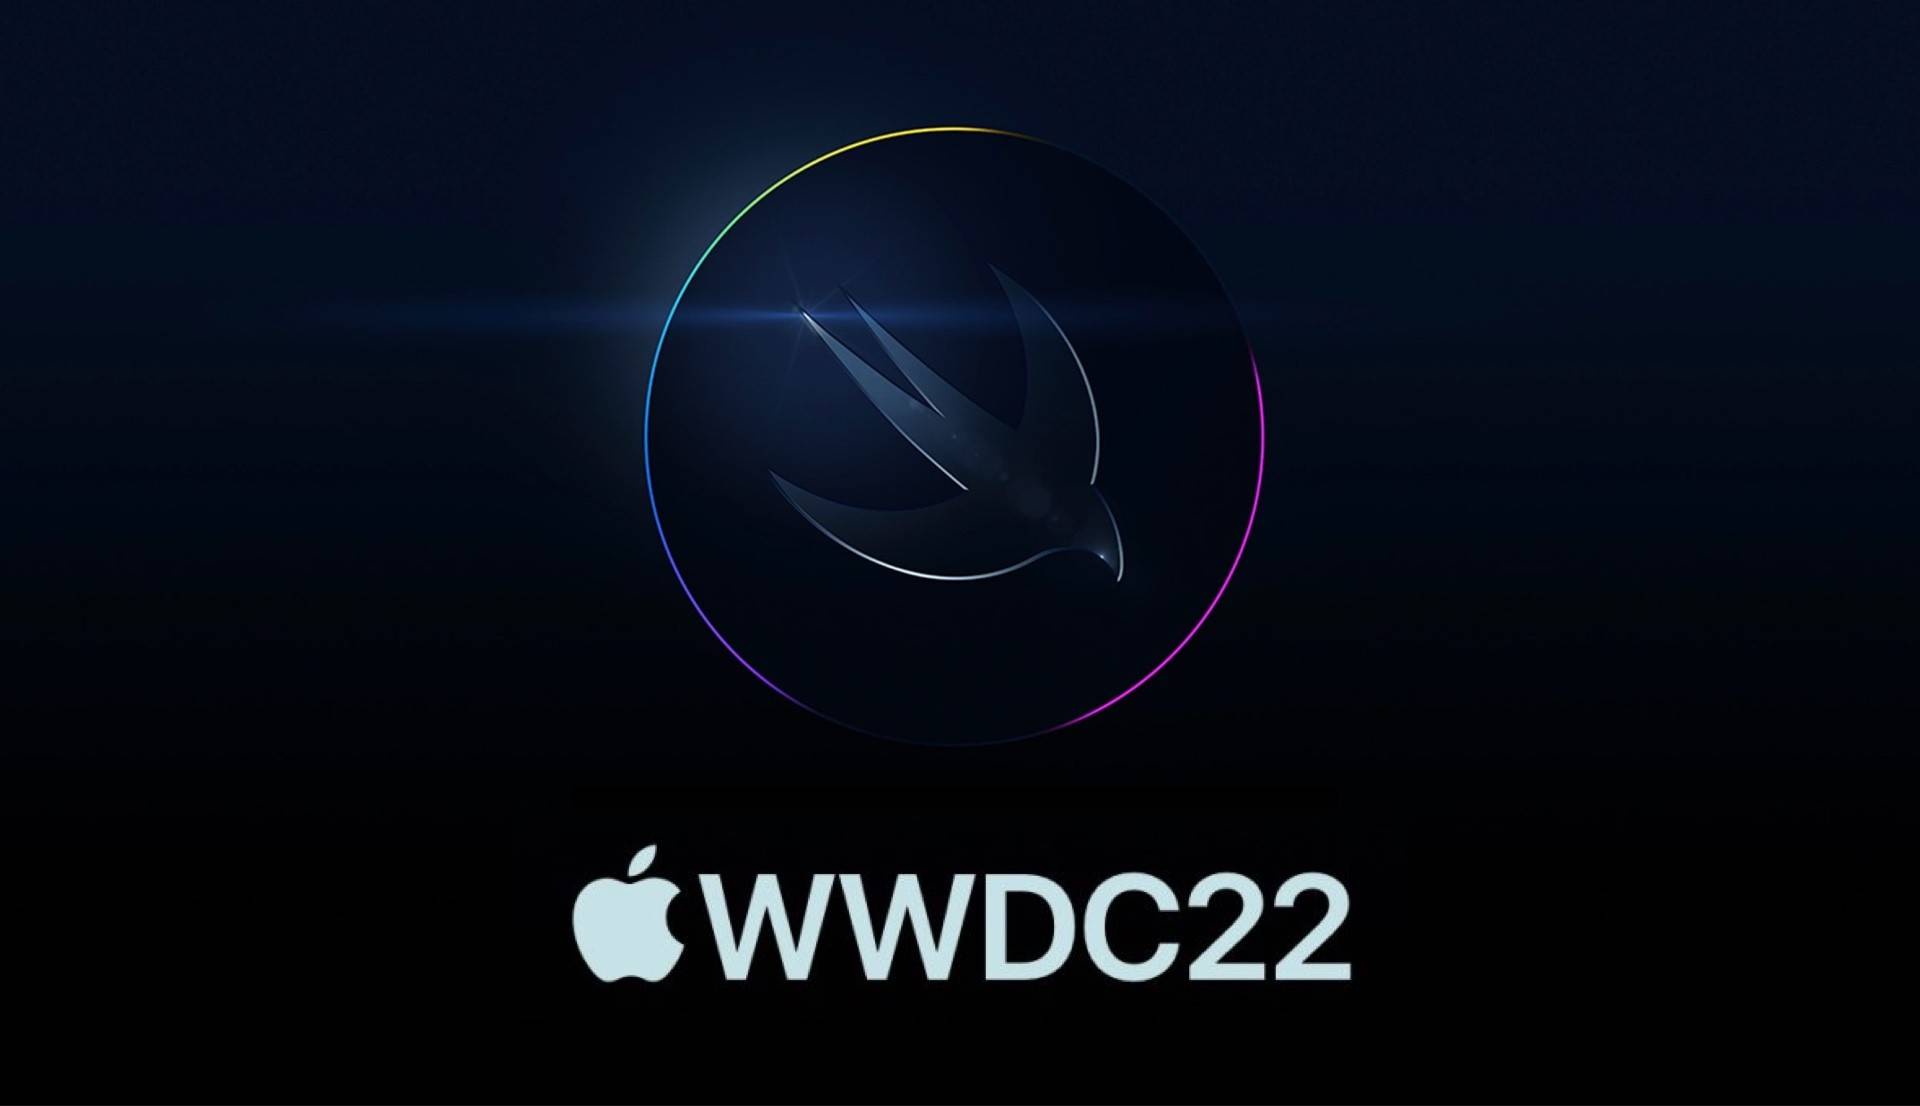 WWDC 2022 logo and text